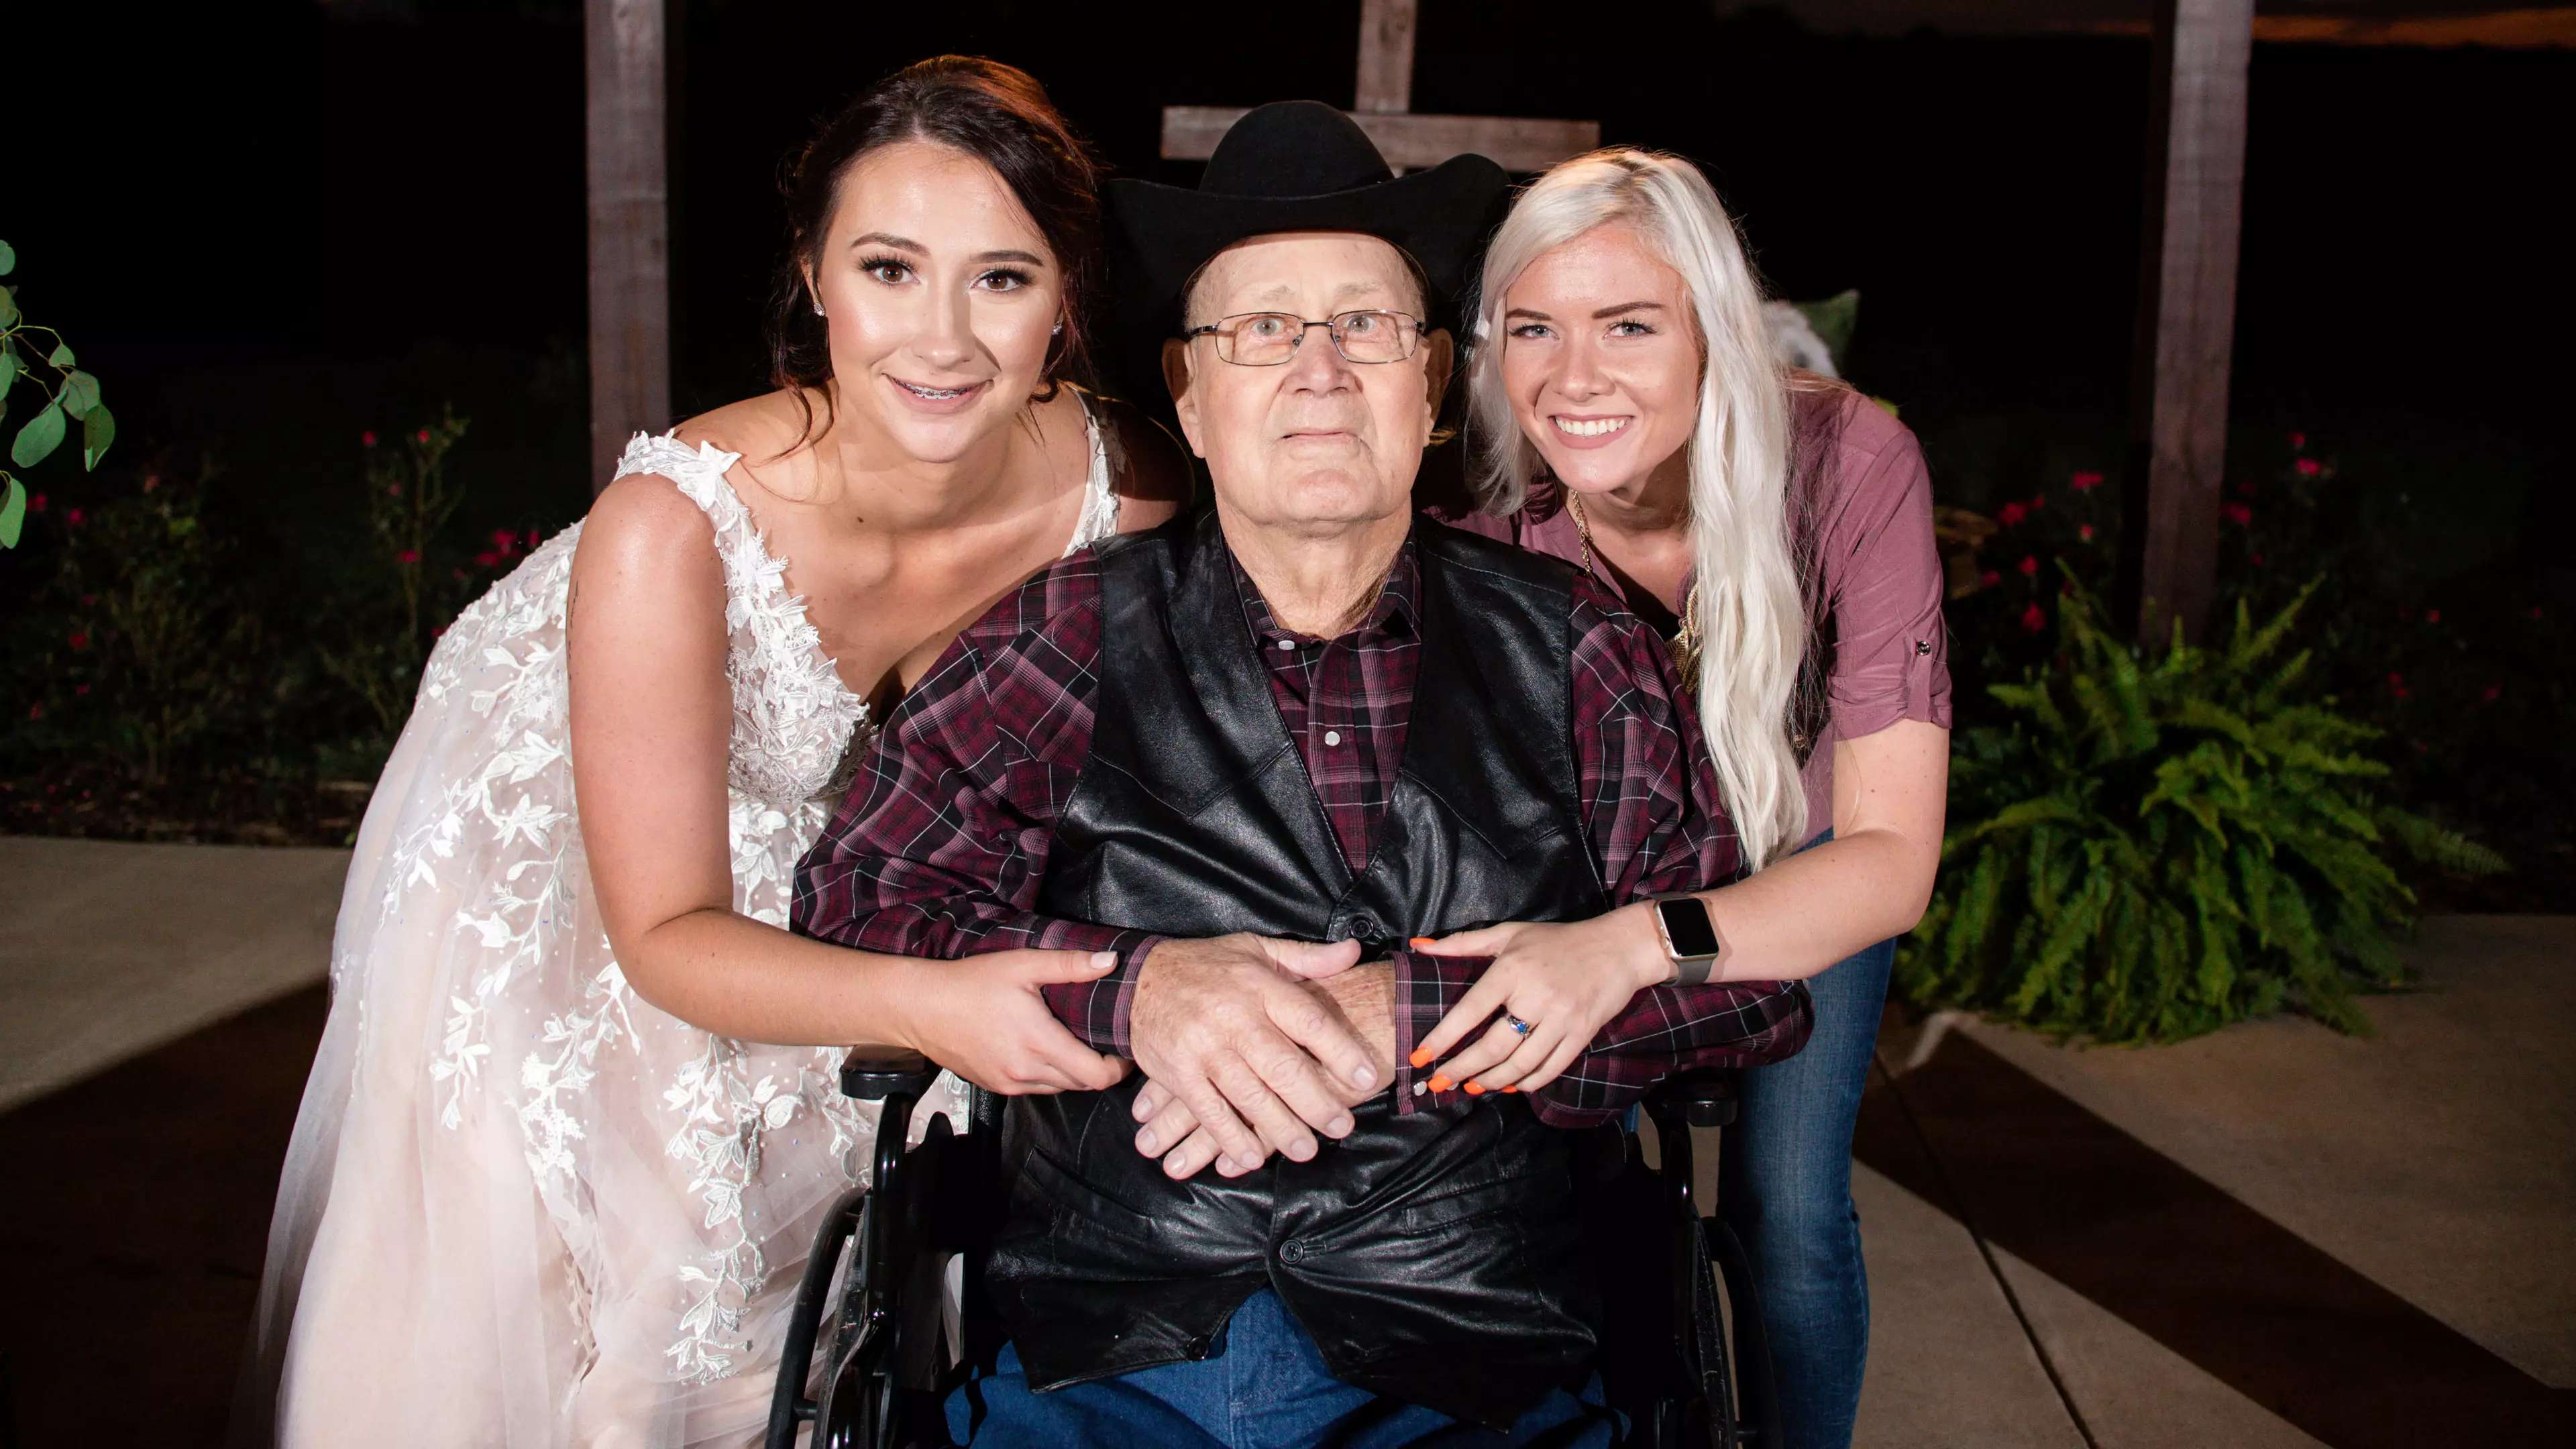 Bride Gets Wed In Front Of Terminally Ill Grandad After Being Given Free Luxury Venue